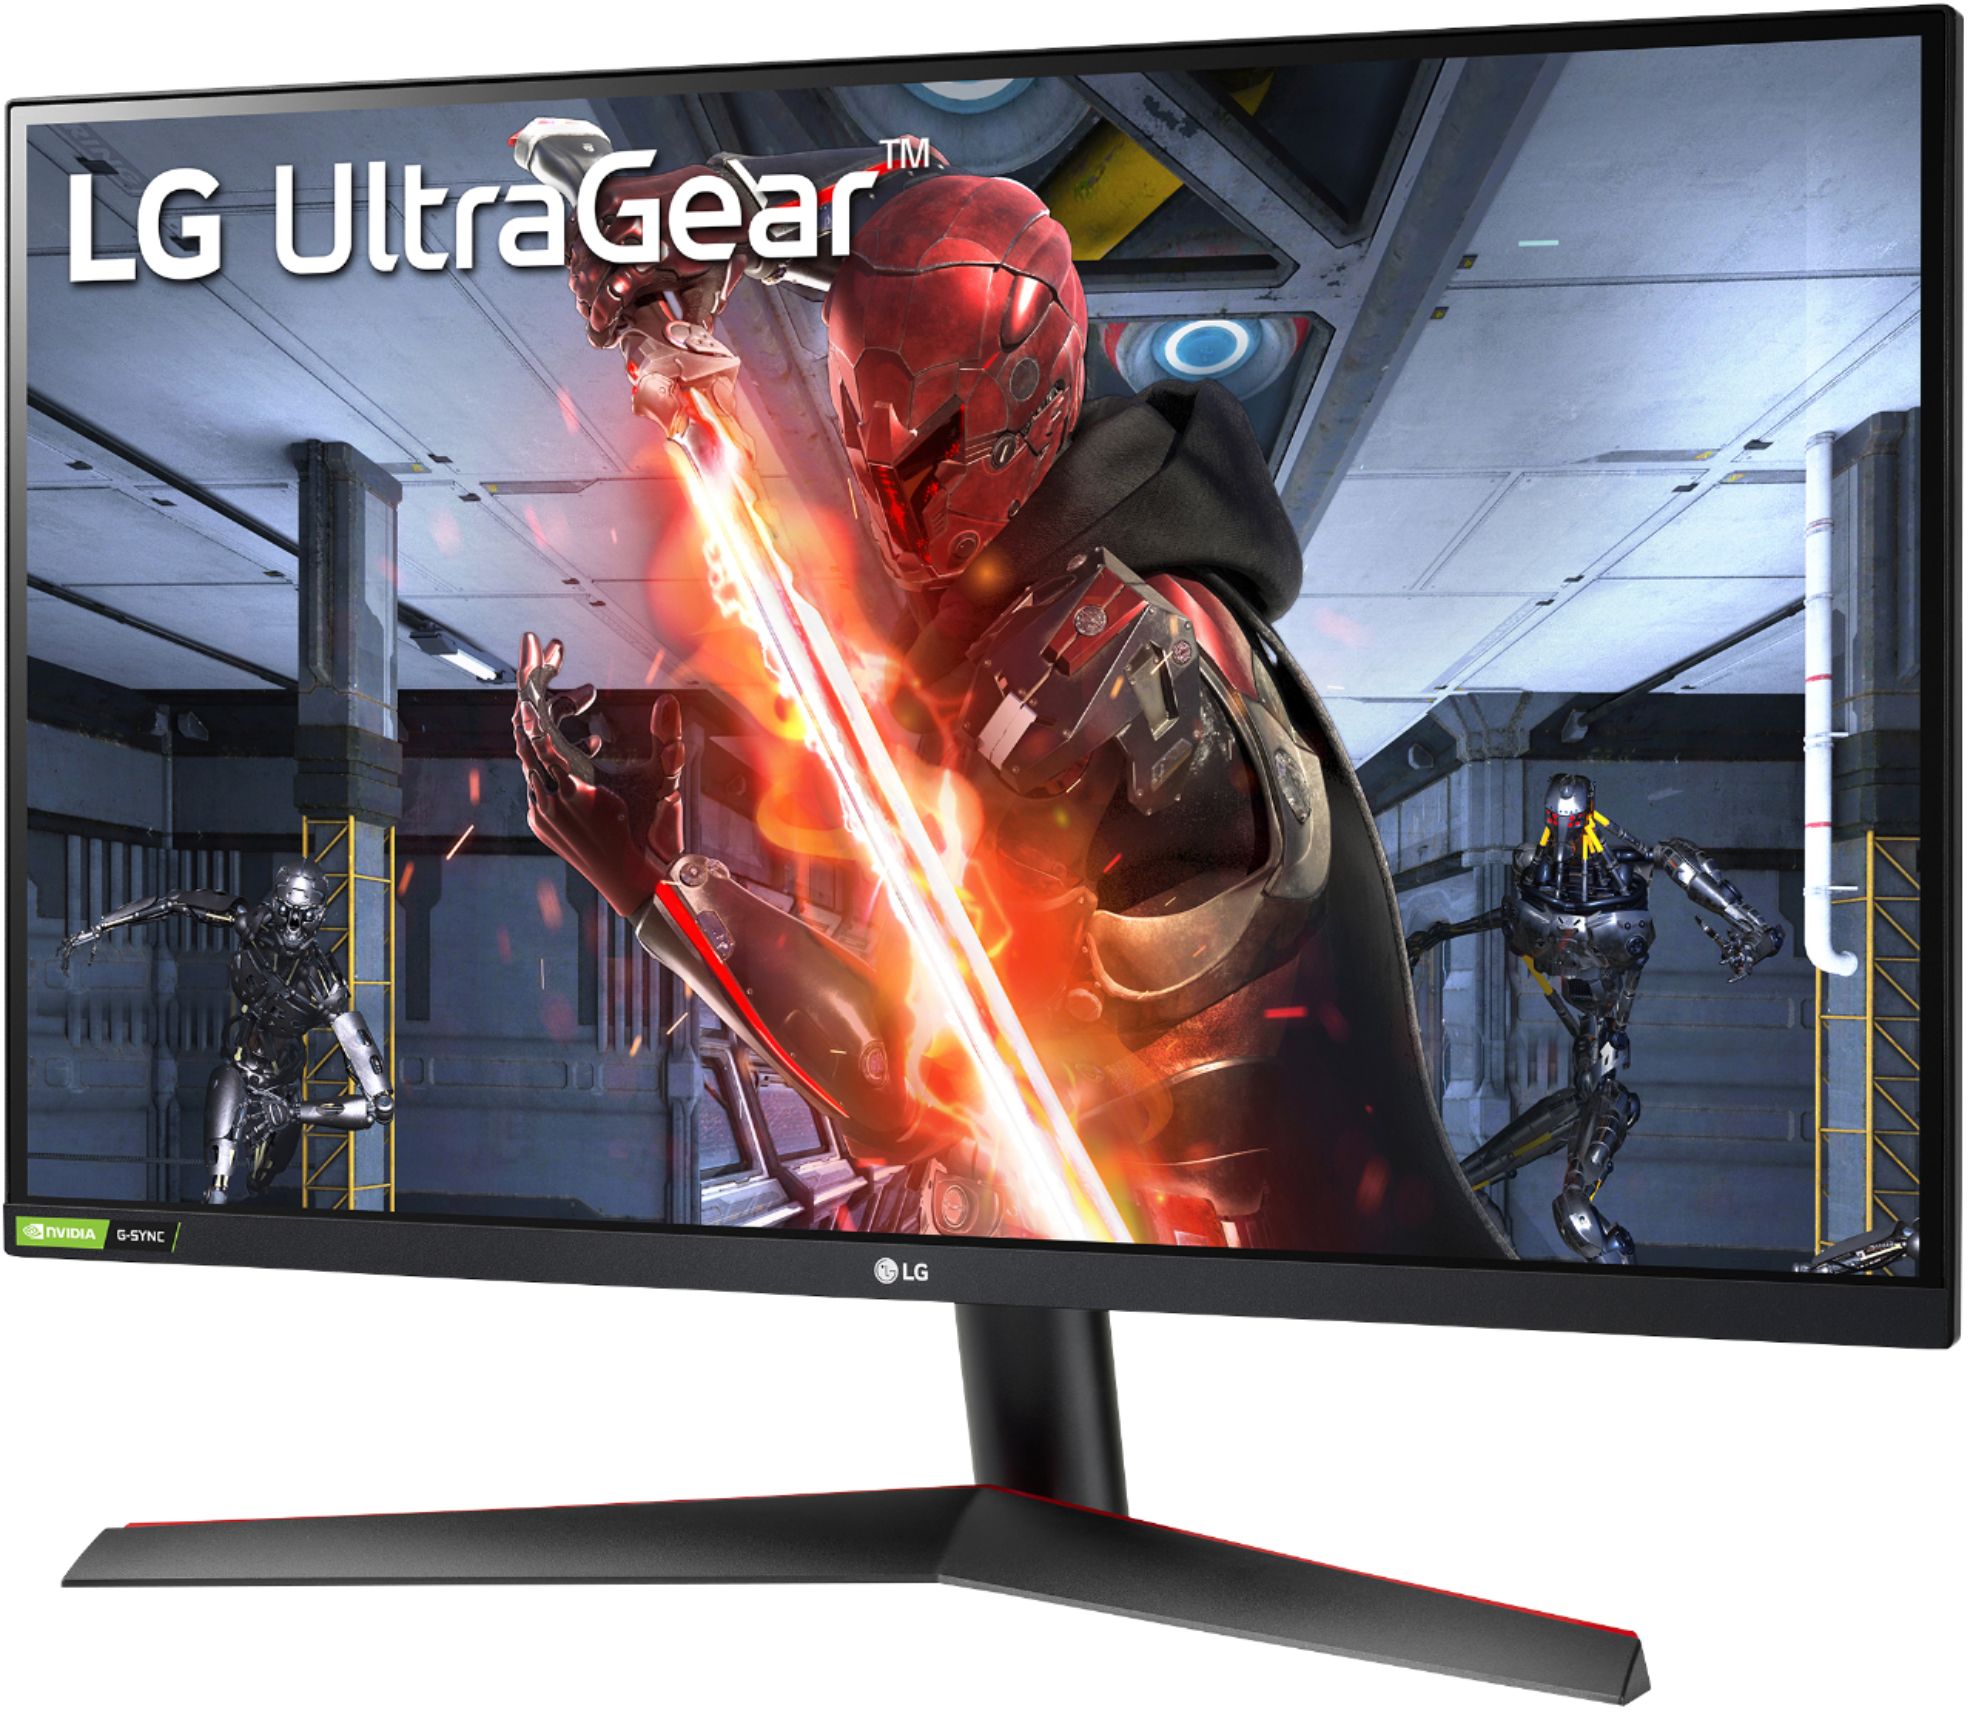 LG 27” UltraGear QHD IPS Gaming Monitor with G-SYNC Compatibility Black 27GN800-B - $299.99